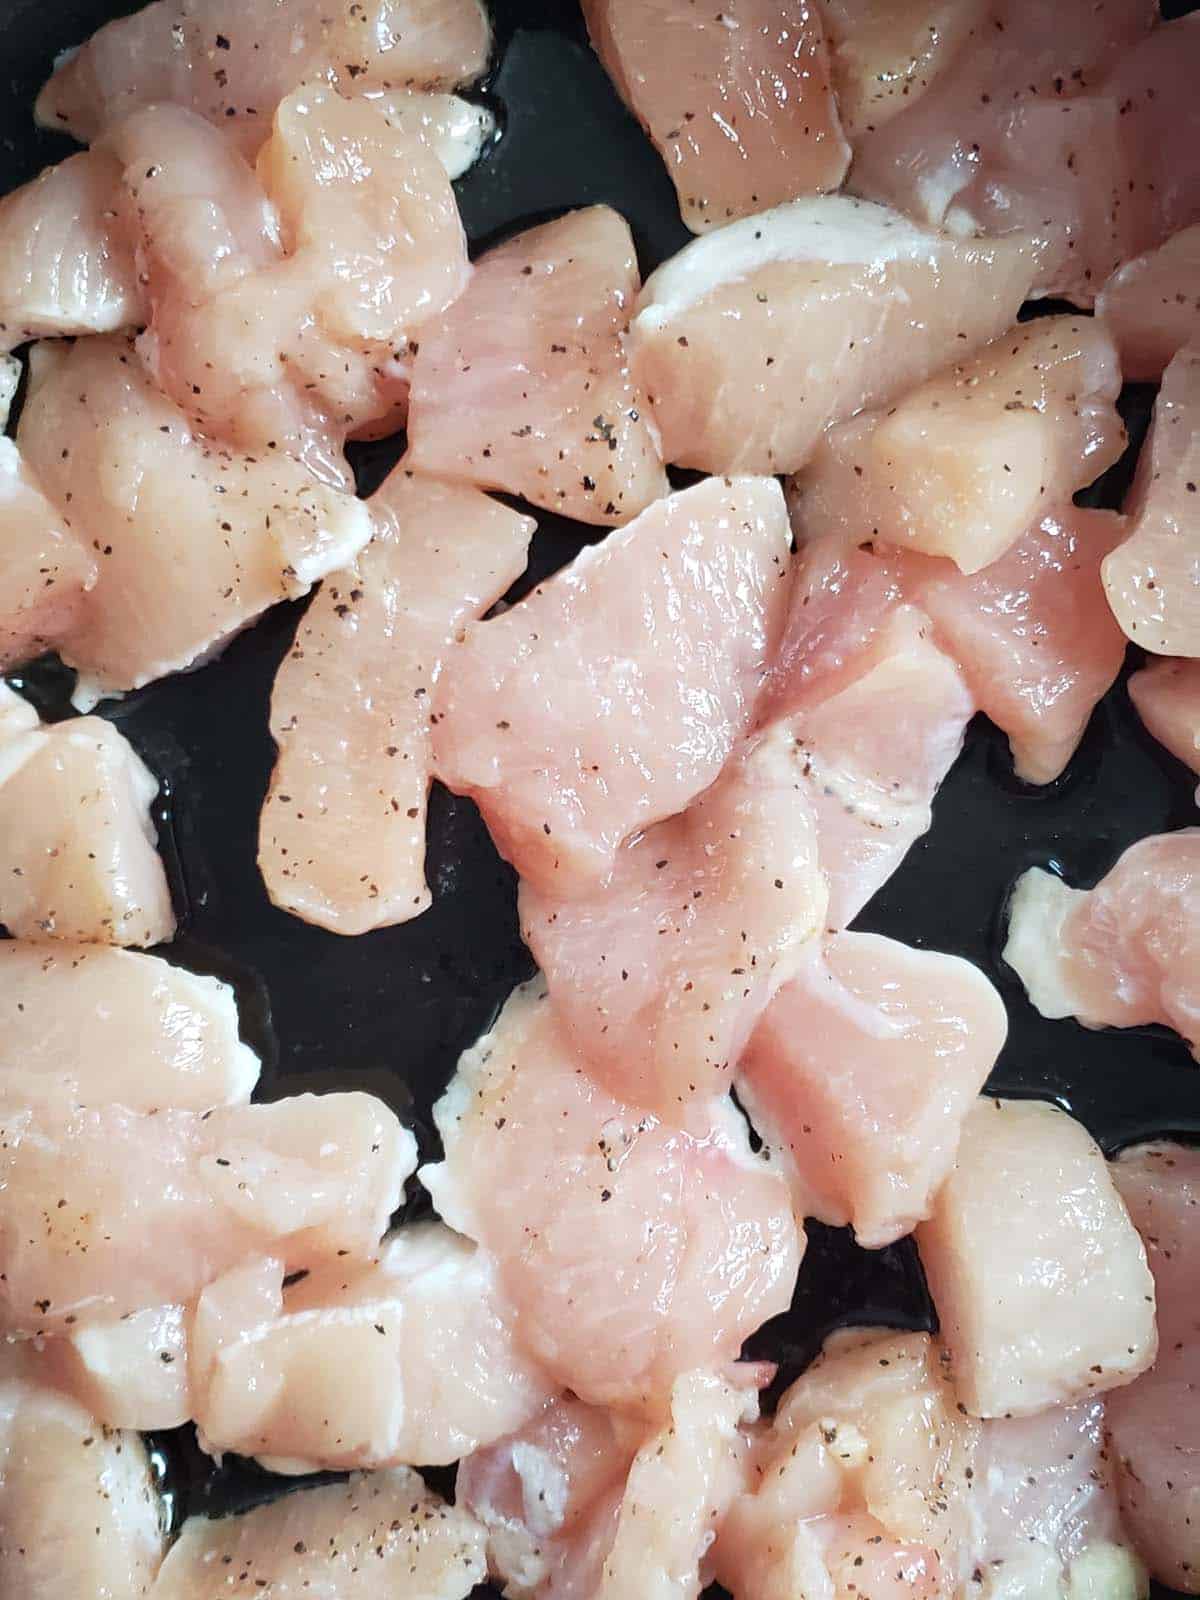 Raw chicken breast cut into small pieces.